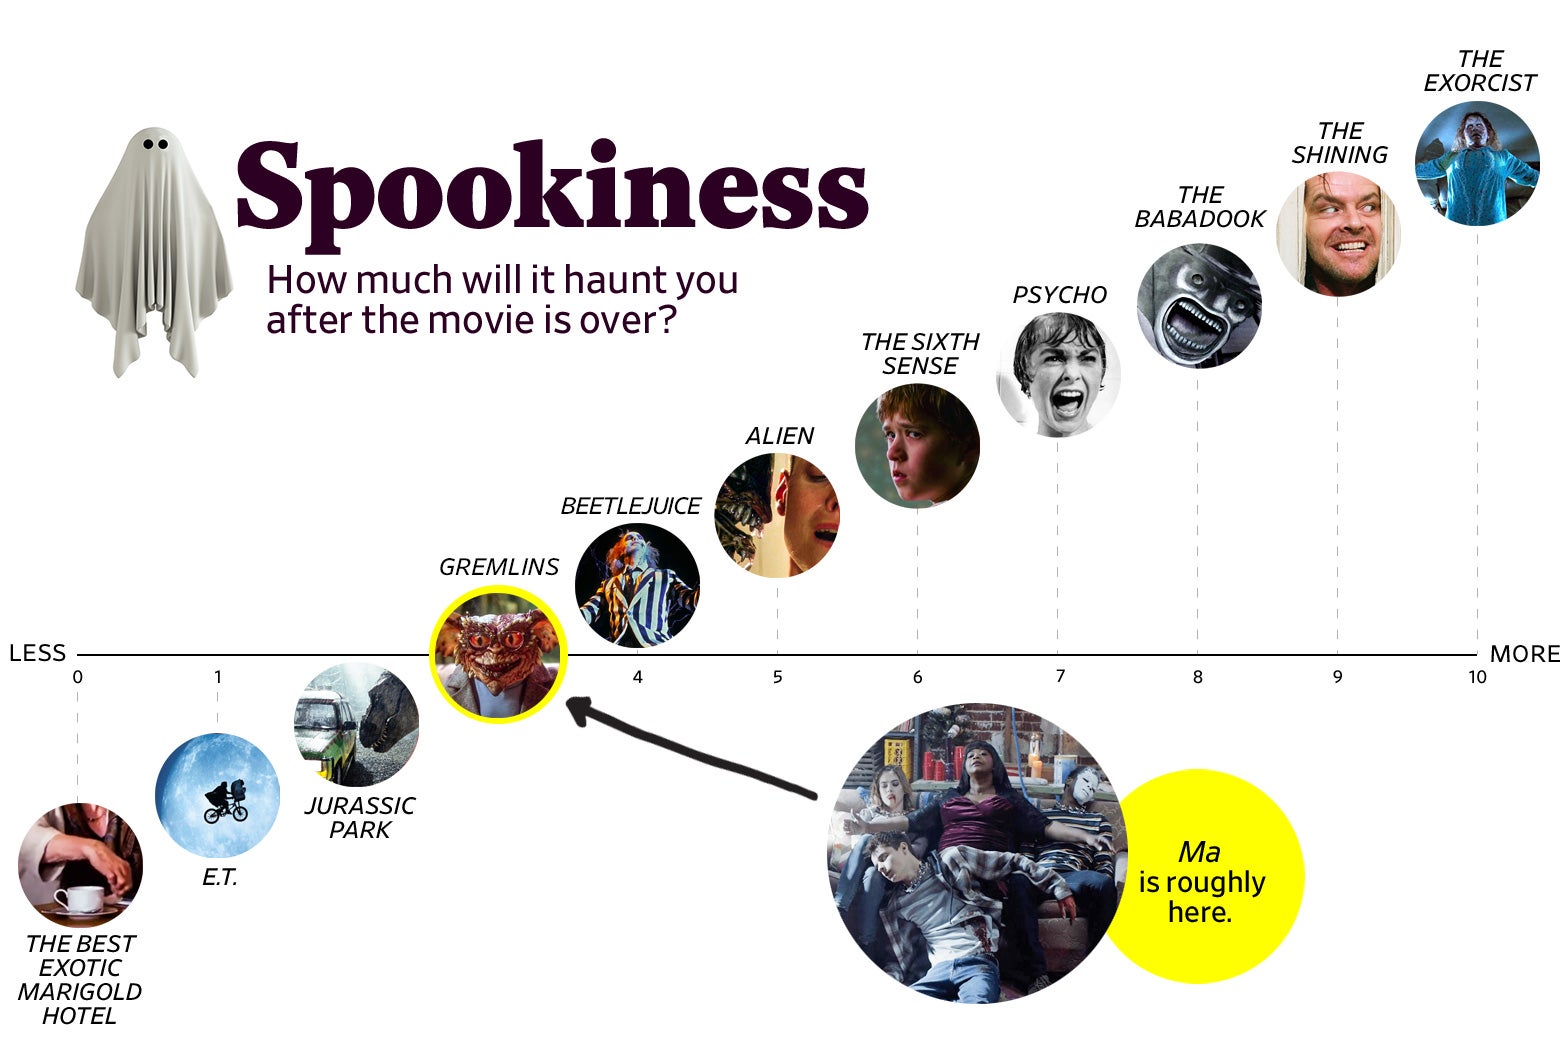 Ma's spookiness is a 3 on par with Gremlins, more spooky than Jurassic Park but less than Beetlejuice.